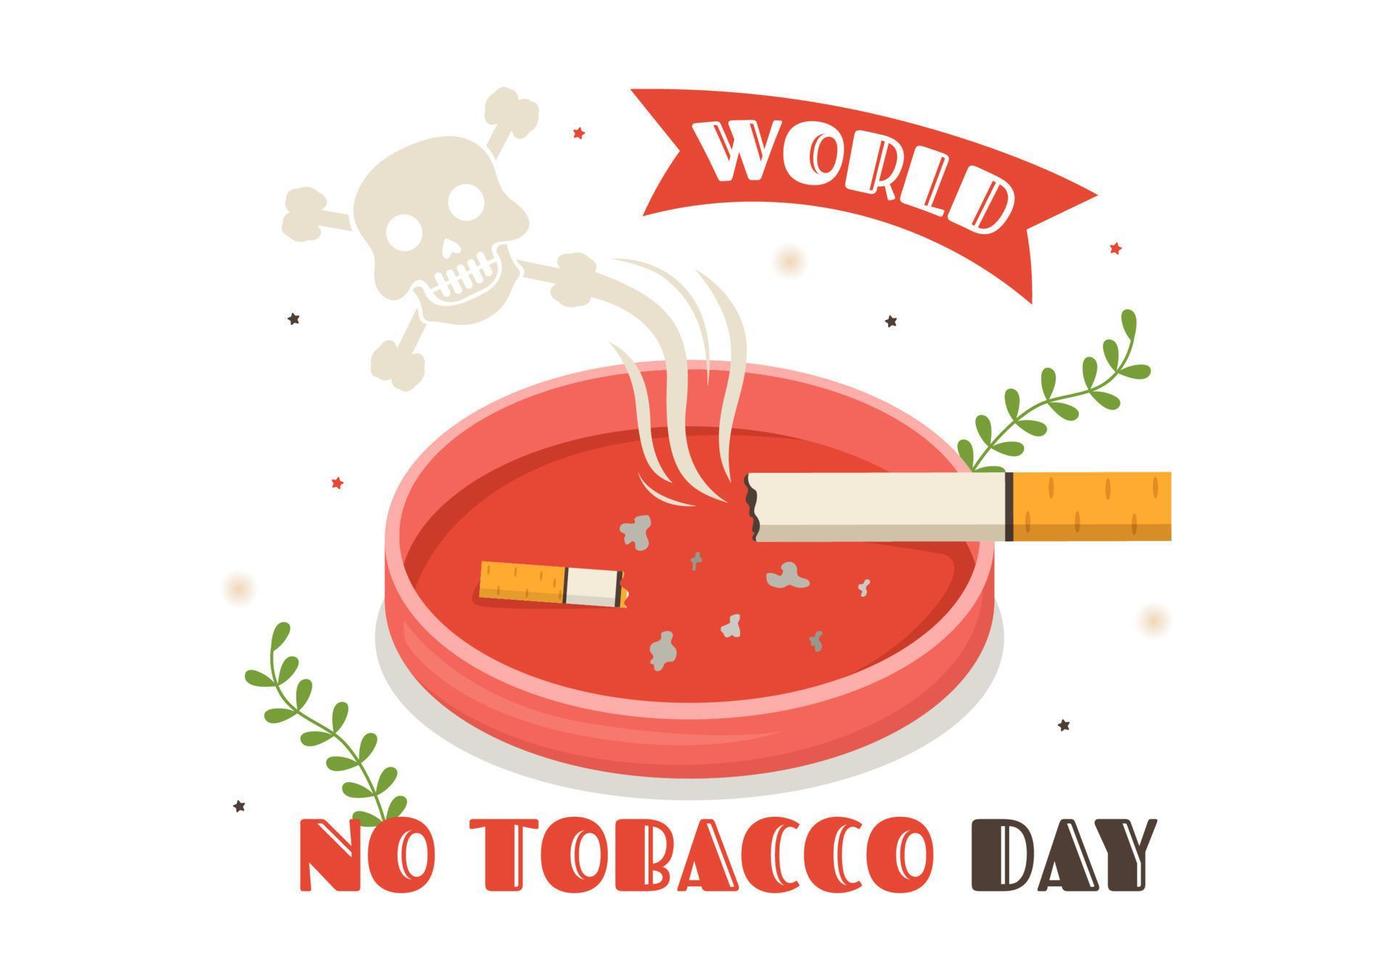 World No Tobacco Day Illustration of Stop Smoking, Cigarette Butt and Harm the Lungs in Flat Cartoon Hand Drawn for Landing Page Templates vector